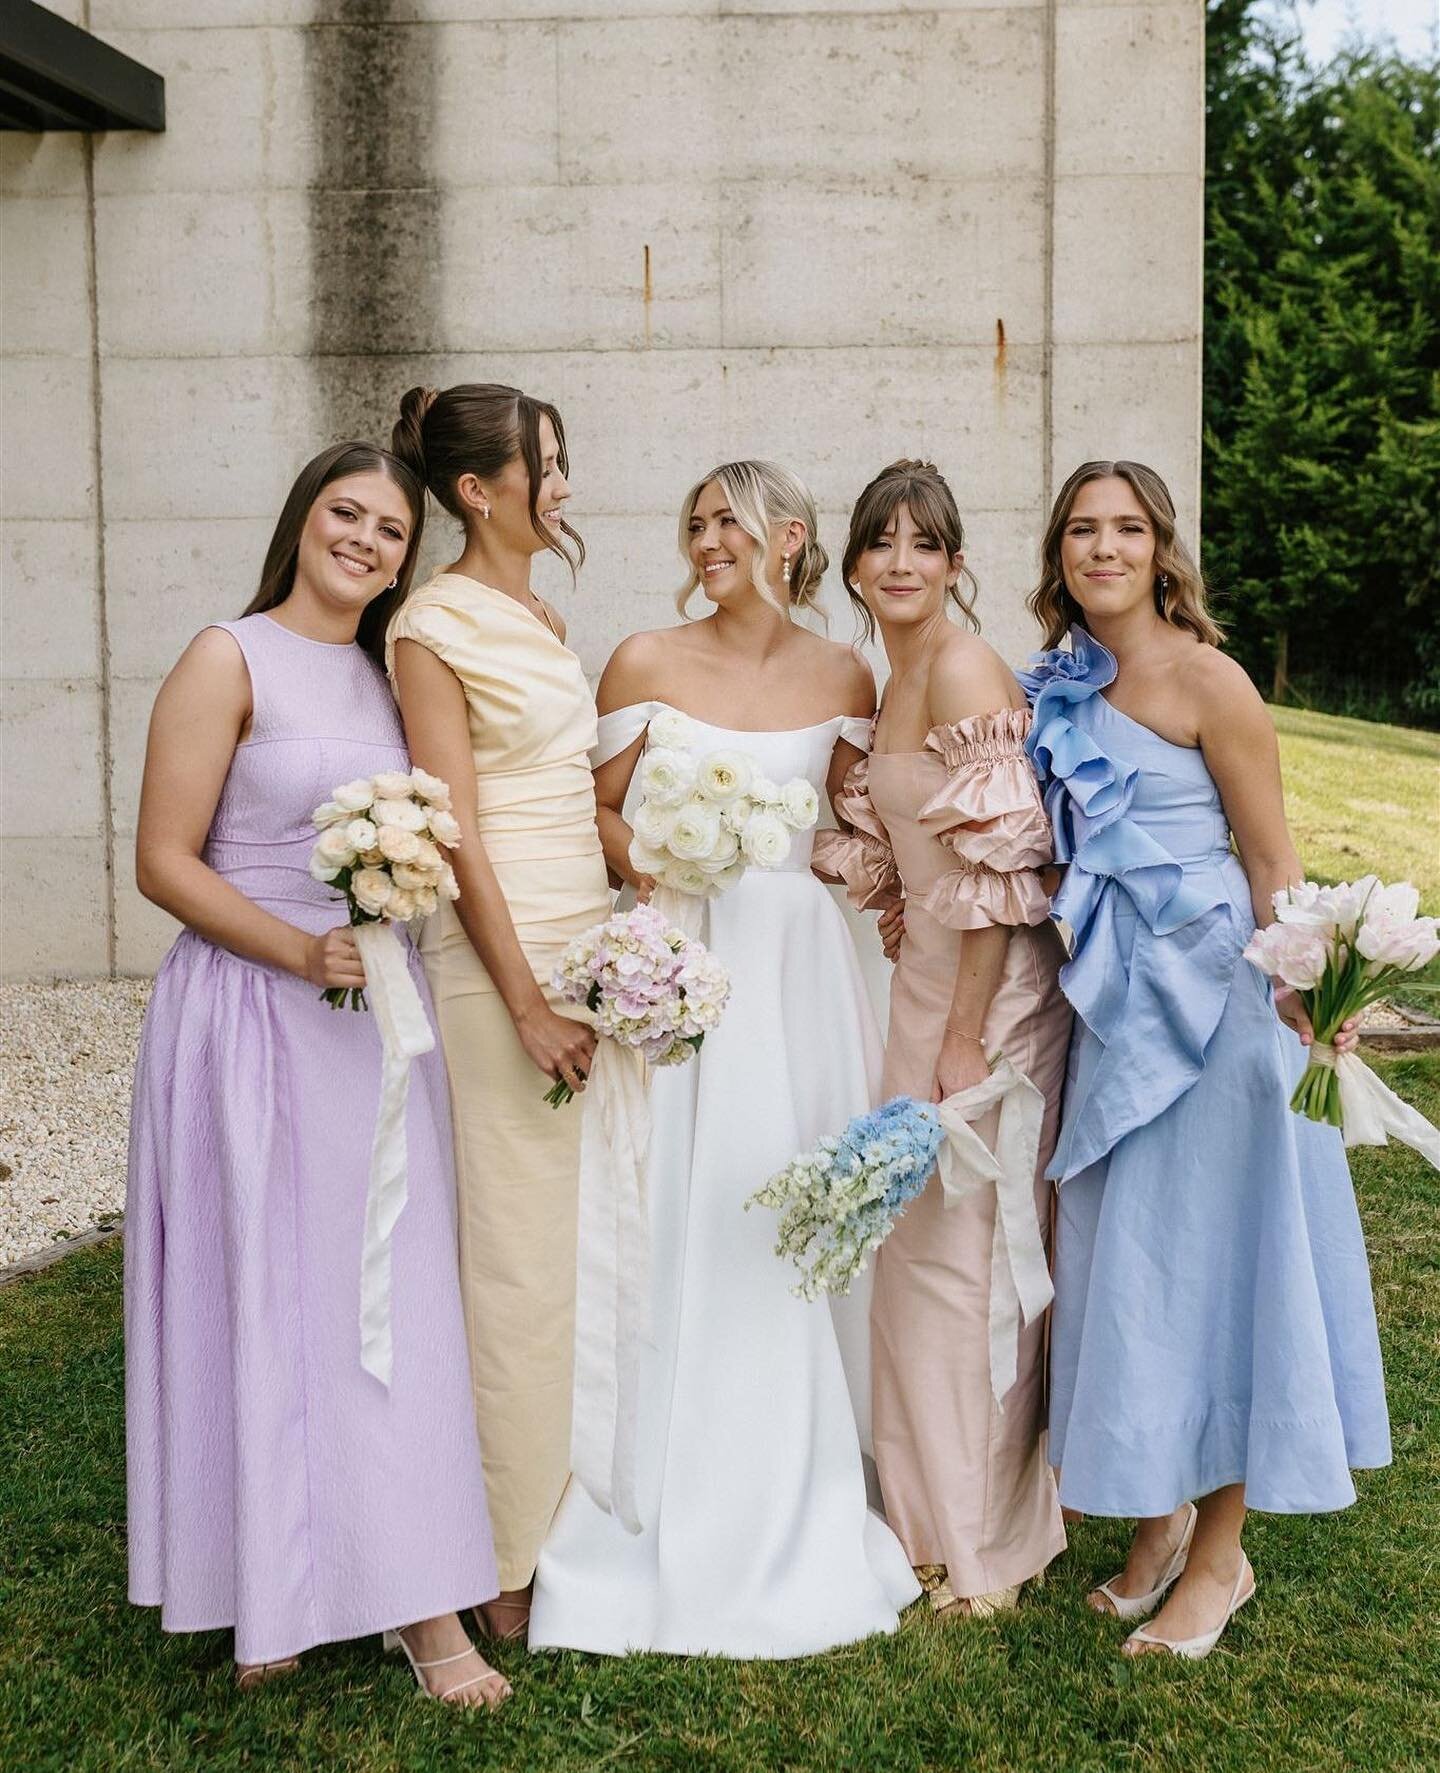 Looking for Bridesmaids&rsquo; dress inspiration?⁠
⁠
Here are 12 go-to brands when starting your search. This season more than ever, a sorbet and pastel looks are making their mark and I&rsquo;m 100% here for it. ⁠
⁠
Aje @_aje_⁠
Bec &amp; Bridge @bec